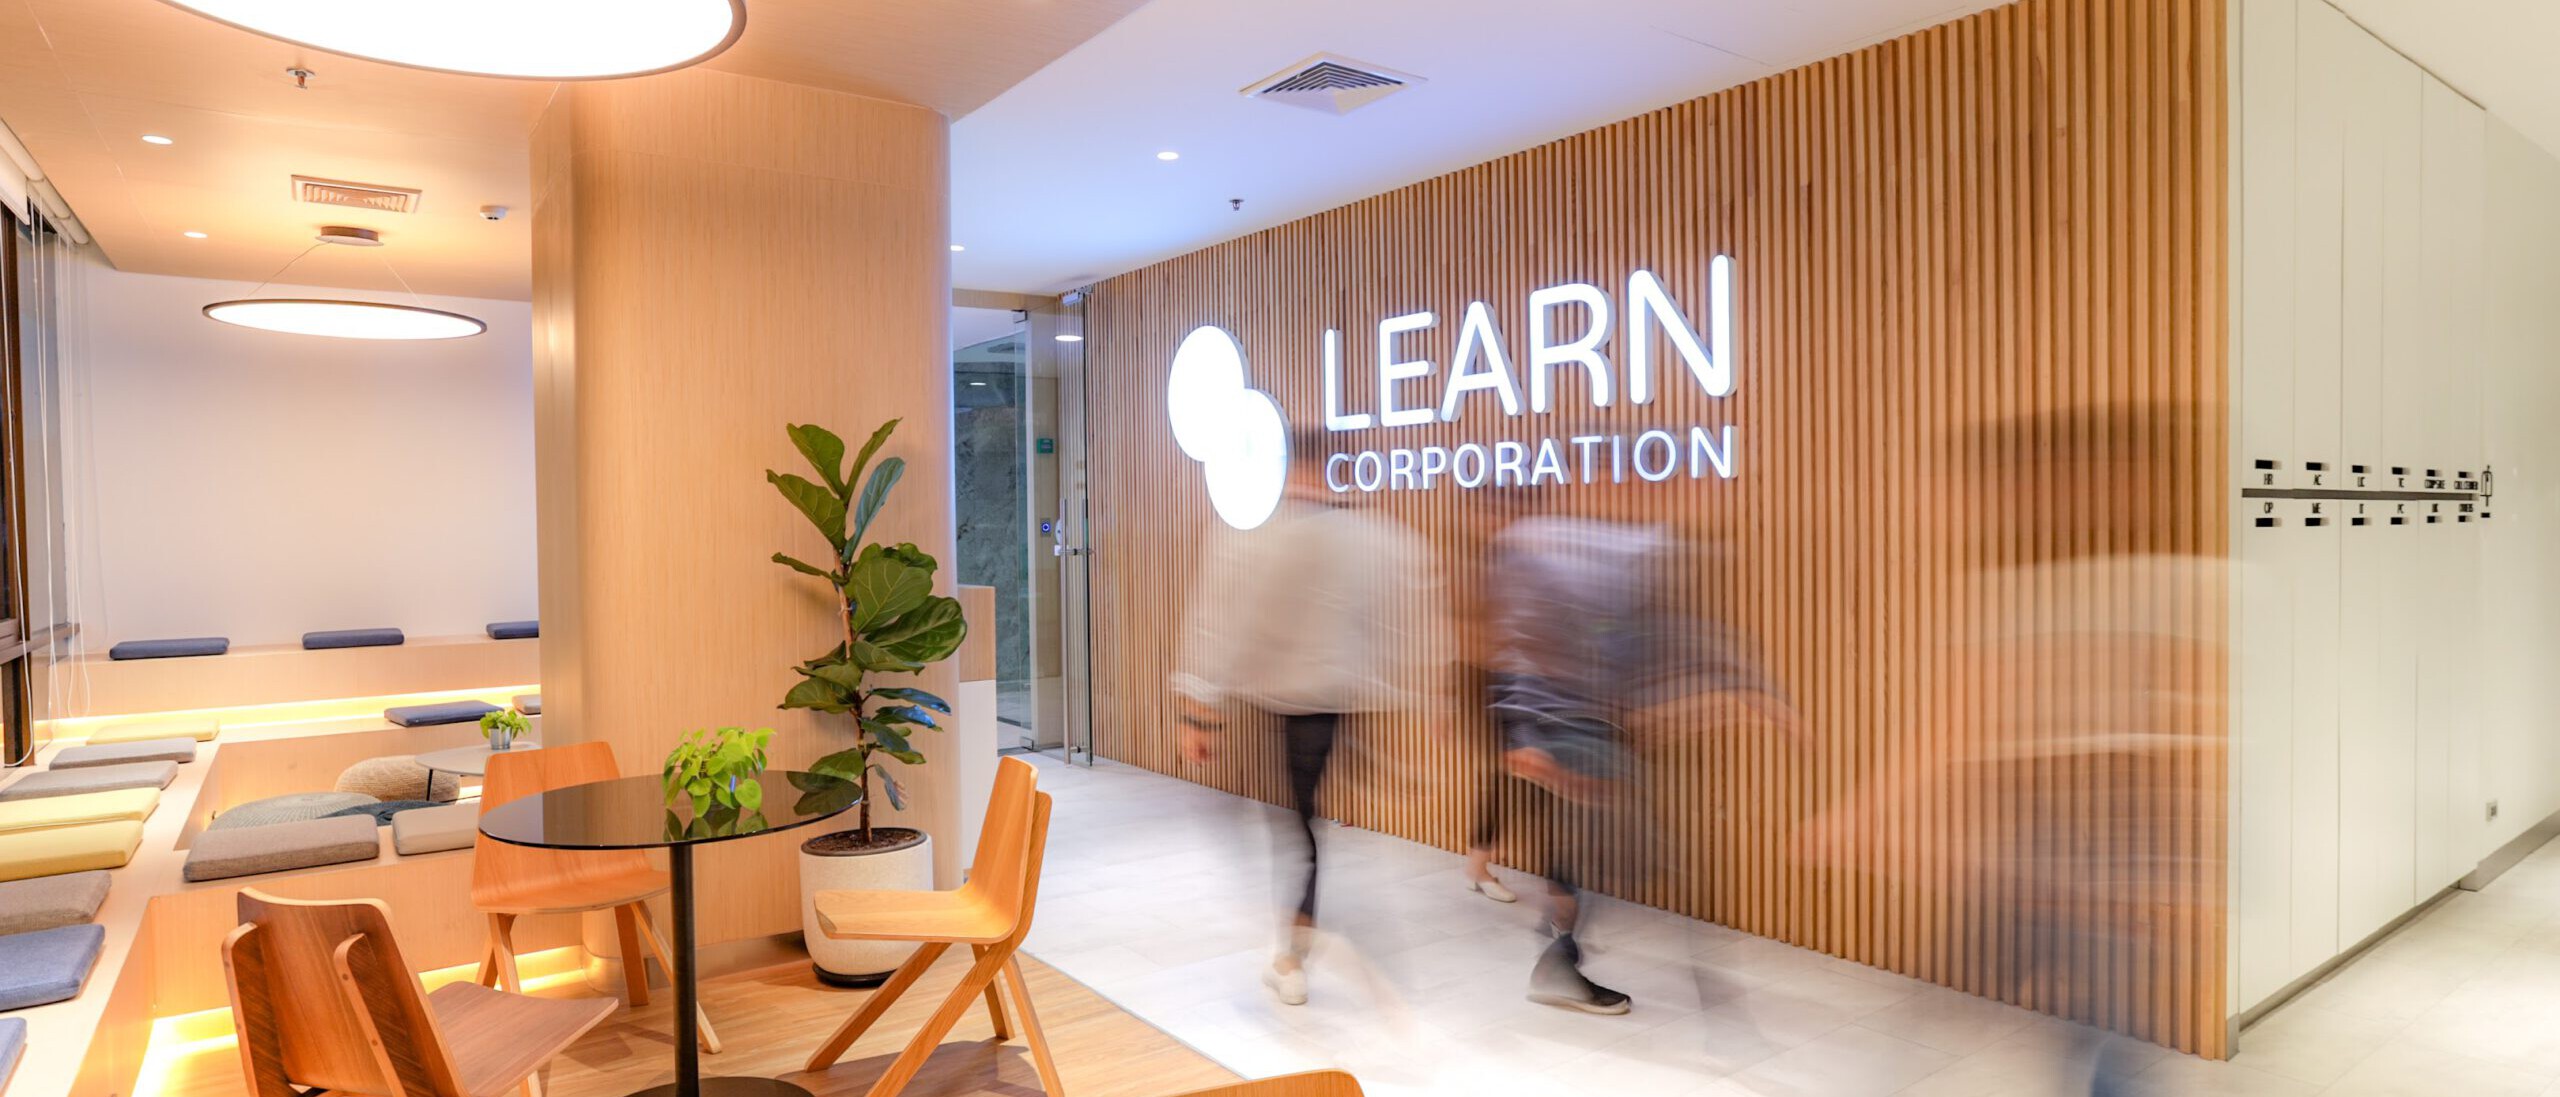 Learn Corp front office